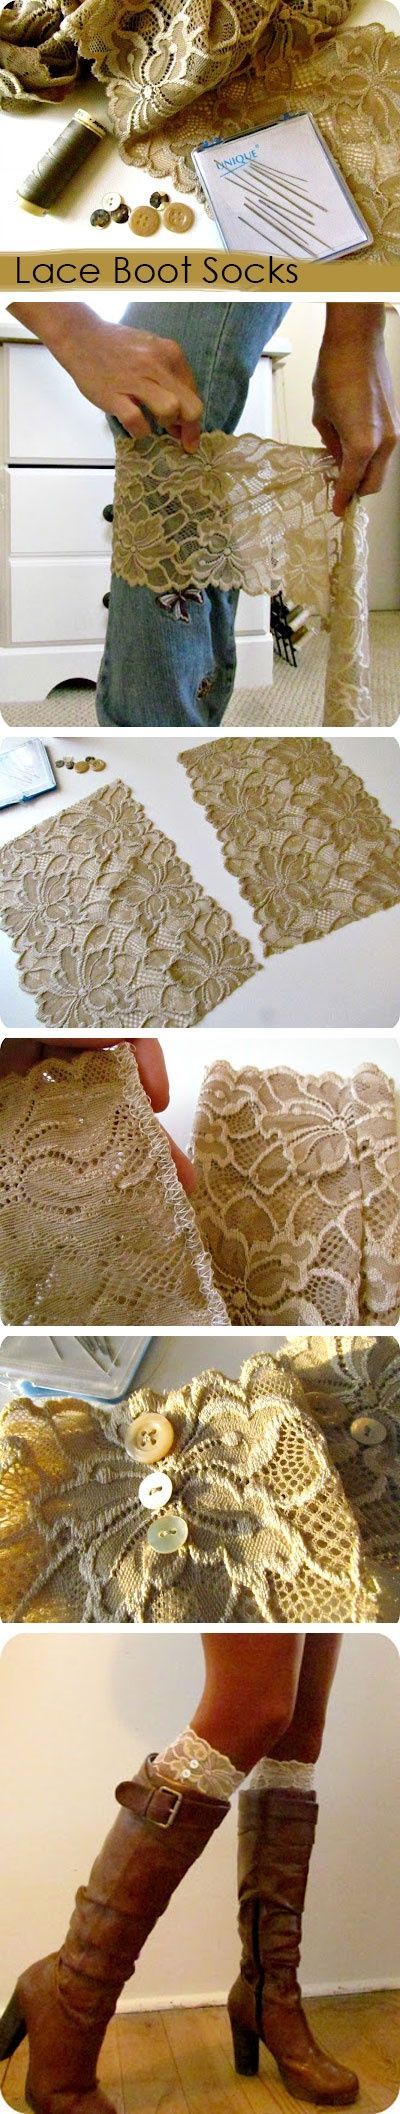 Lace boot socks…want to make some of these!